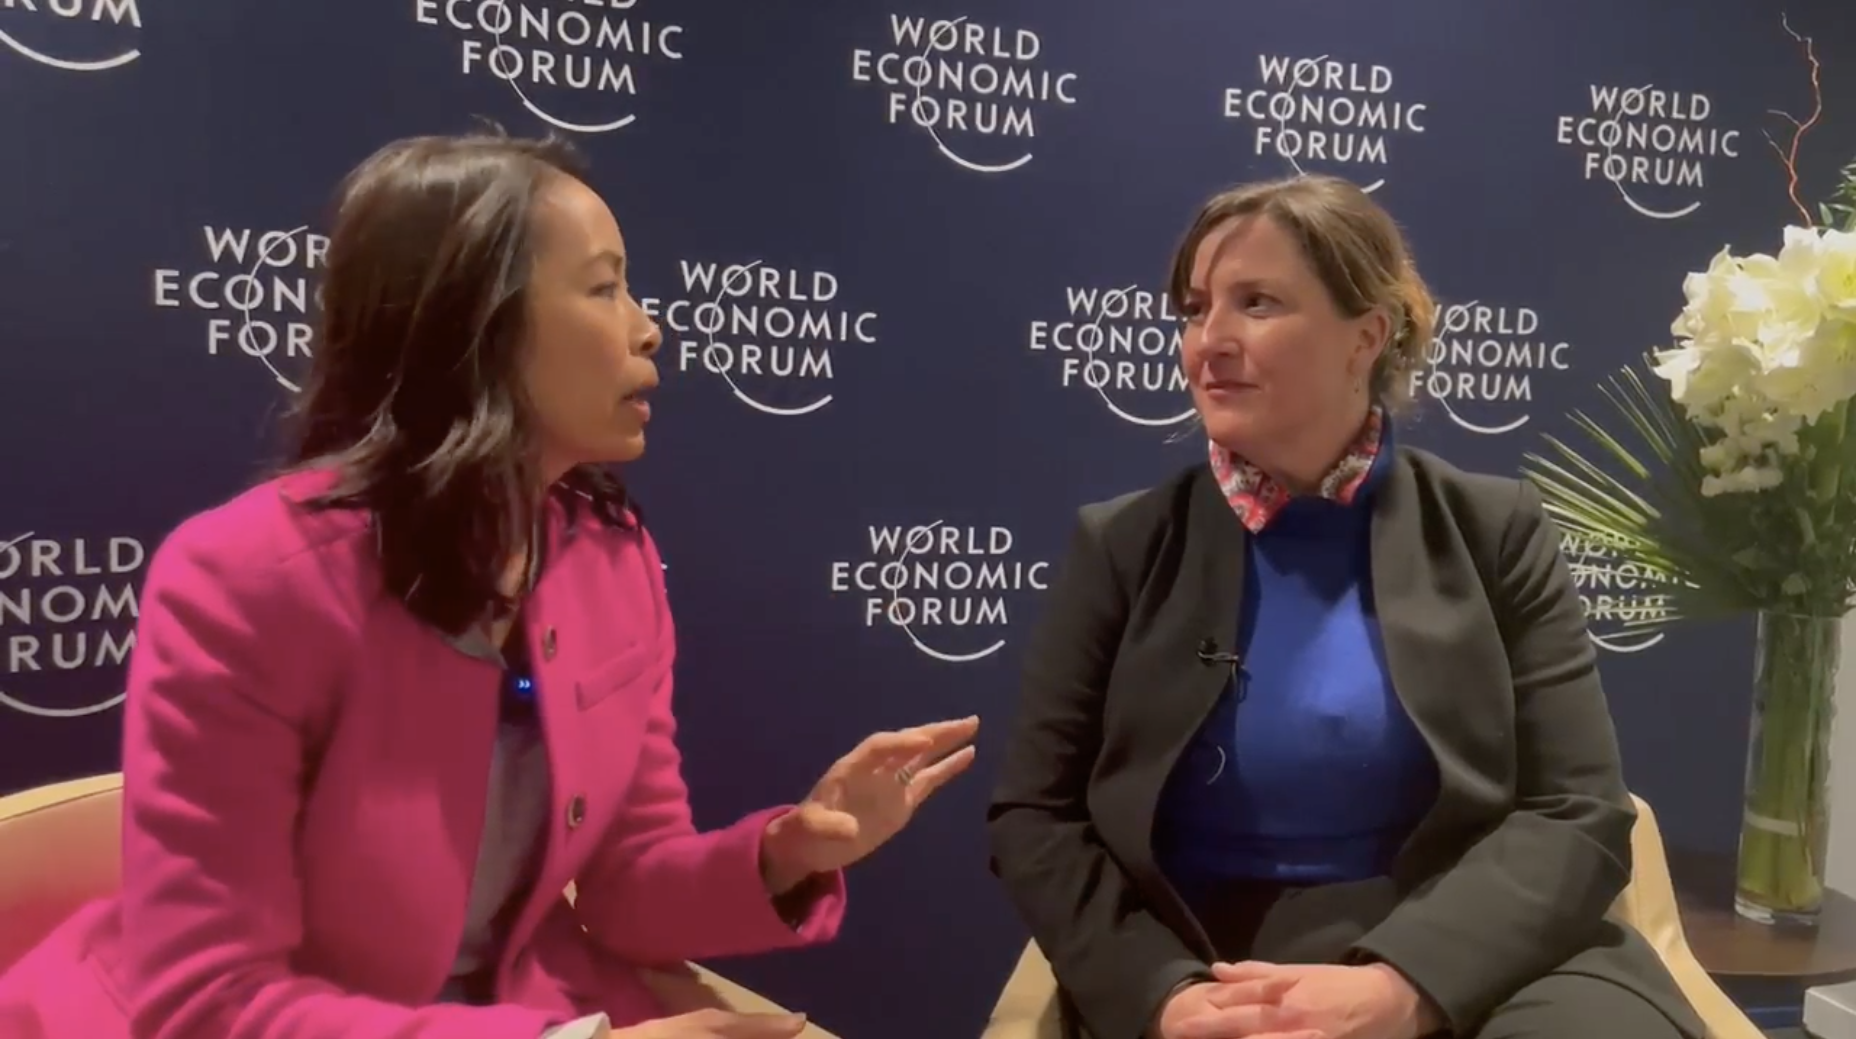 Forkast.News Editor-in-chief Angie Lau (left), World Economic Forum Head of Blockchain and Digital Assets Brynly Llyr (right)